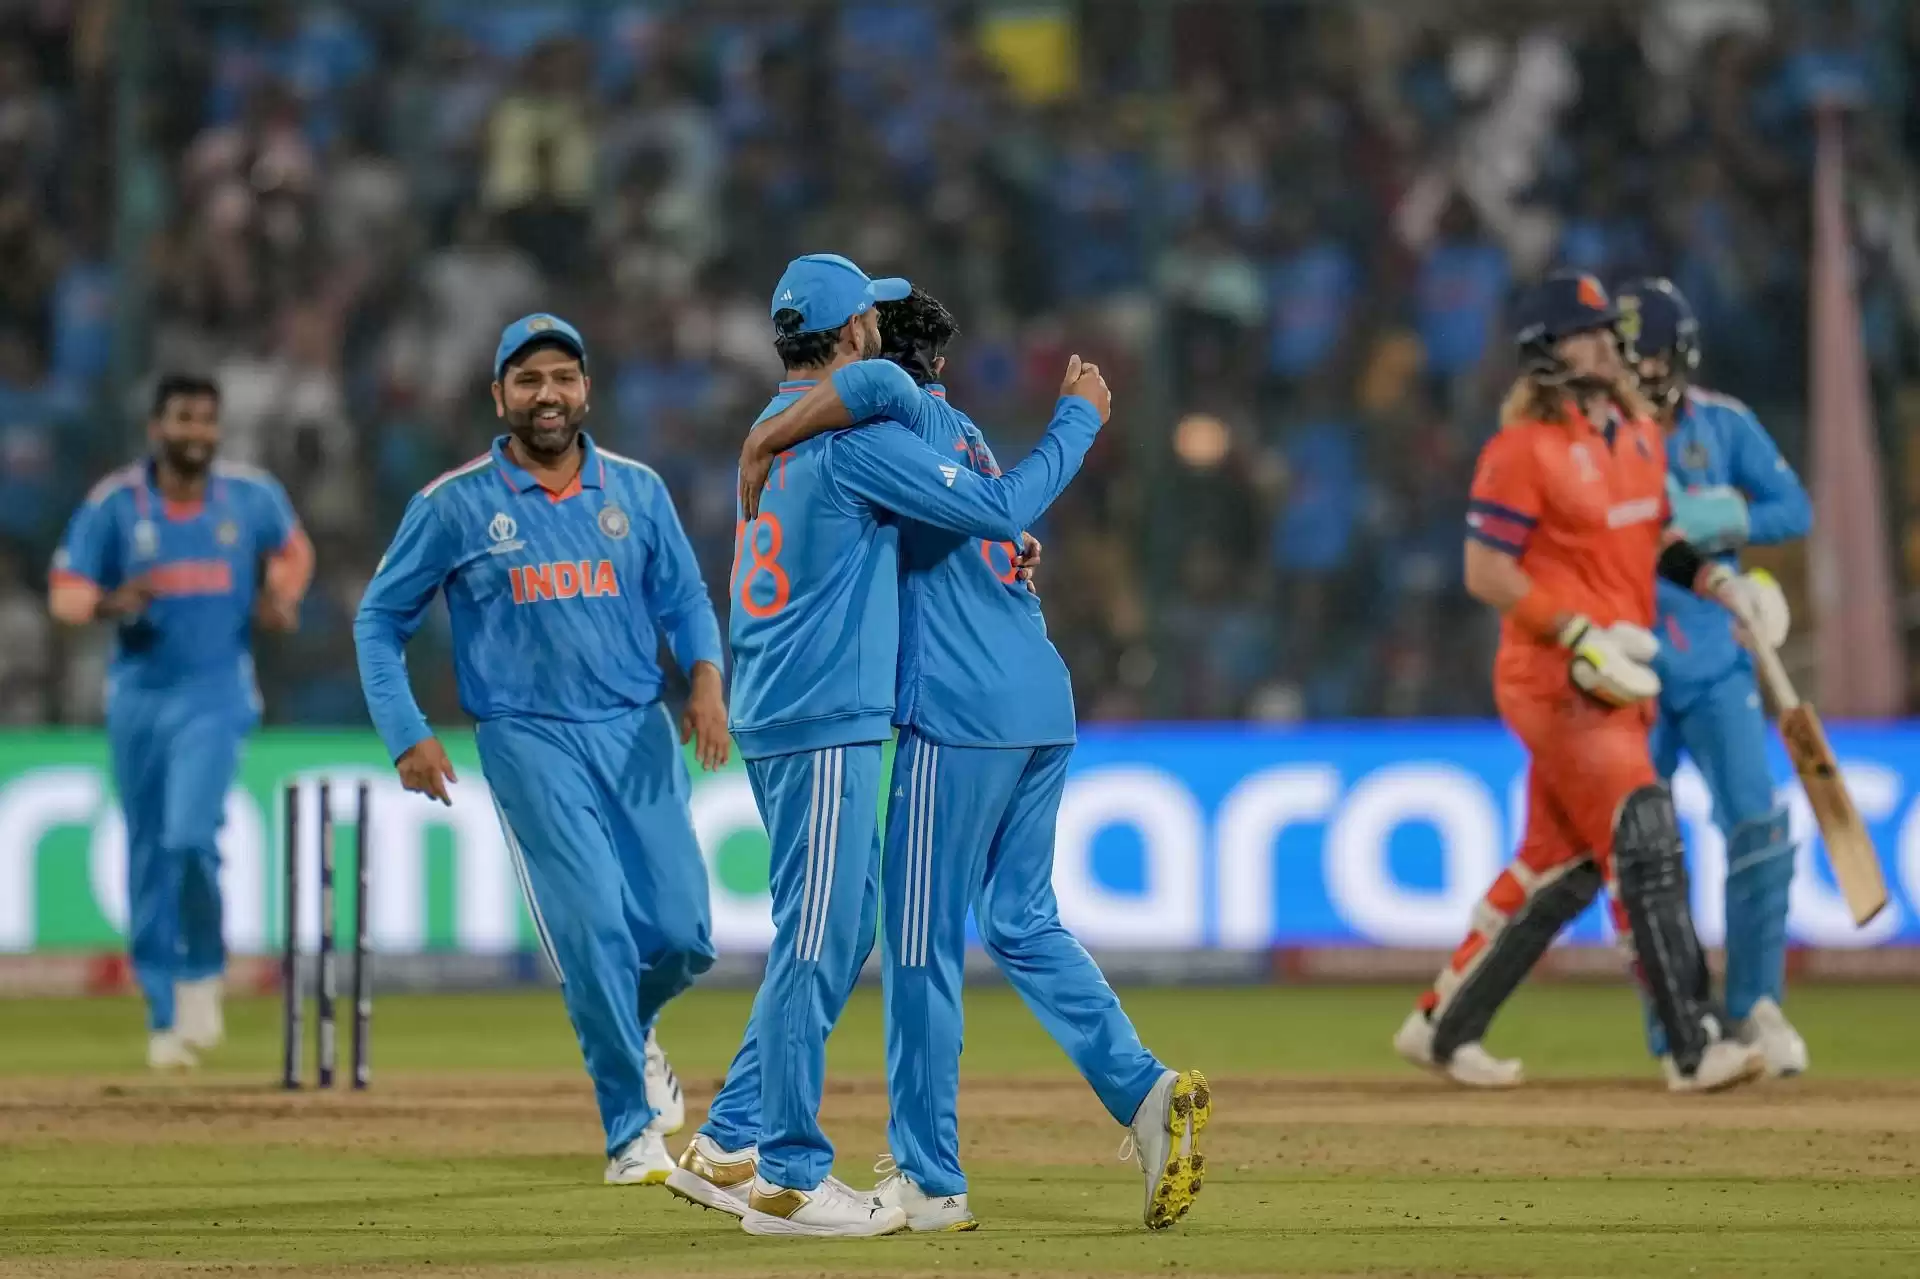 India Netherlands match 2023 World Cup: Recap of yesterday's game